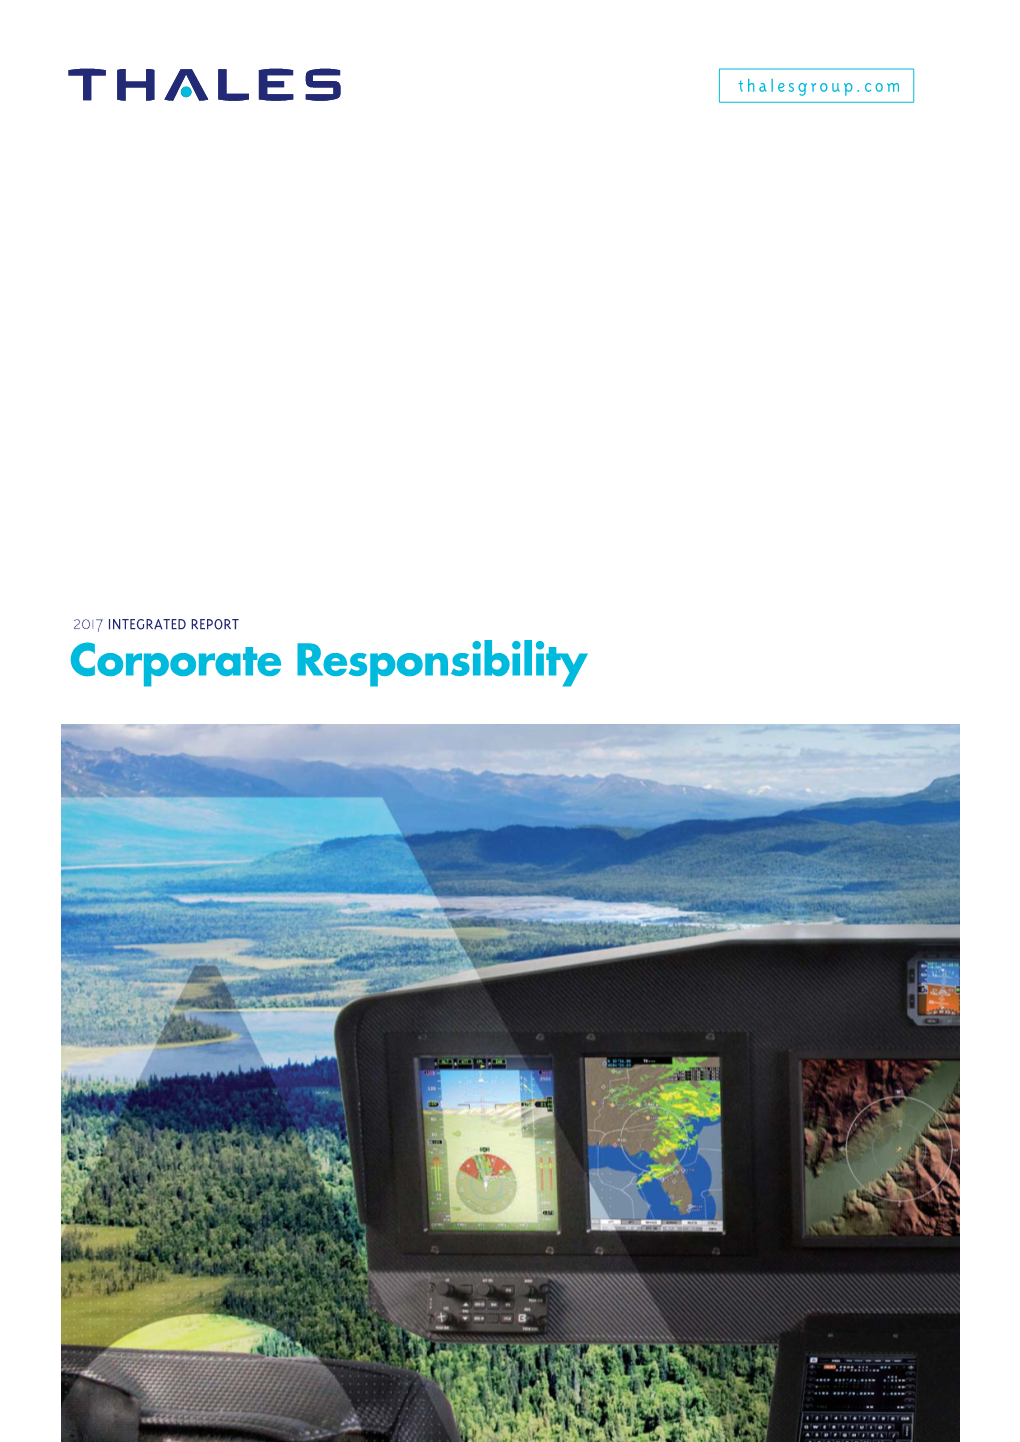 2017 INTEGRATED REPORT Corporate Responsibility CONTENTS